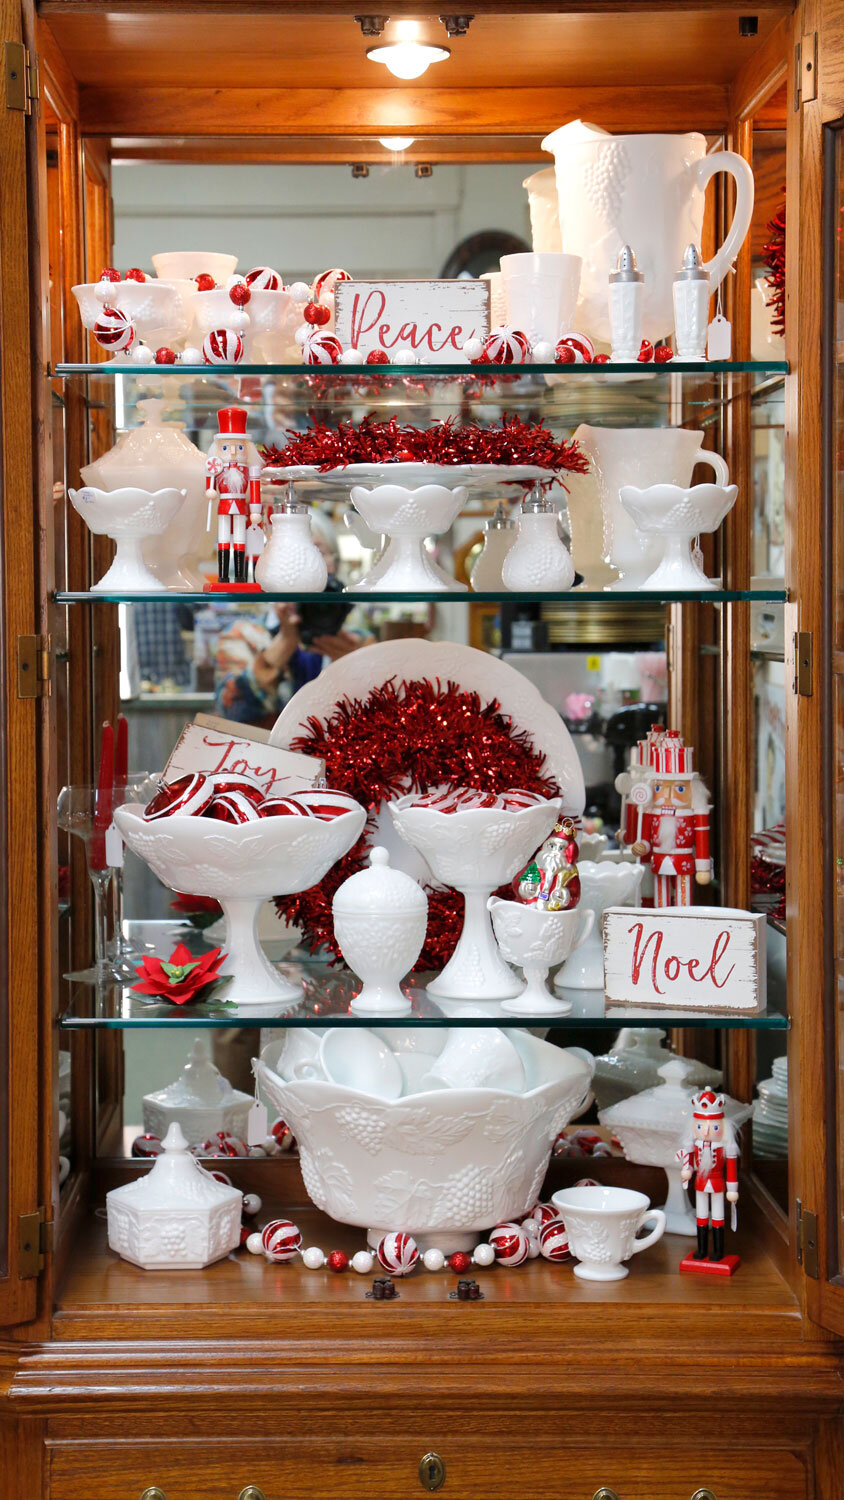 Past and Present Home Gallery collectible milk glass on display